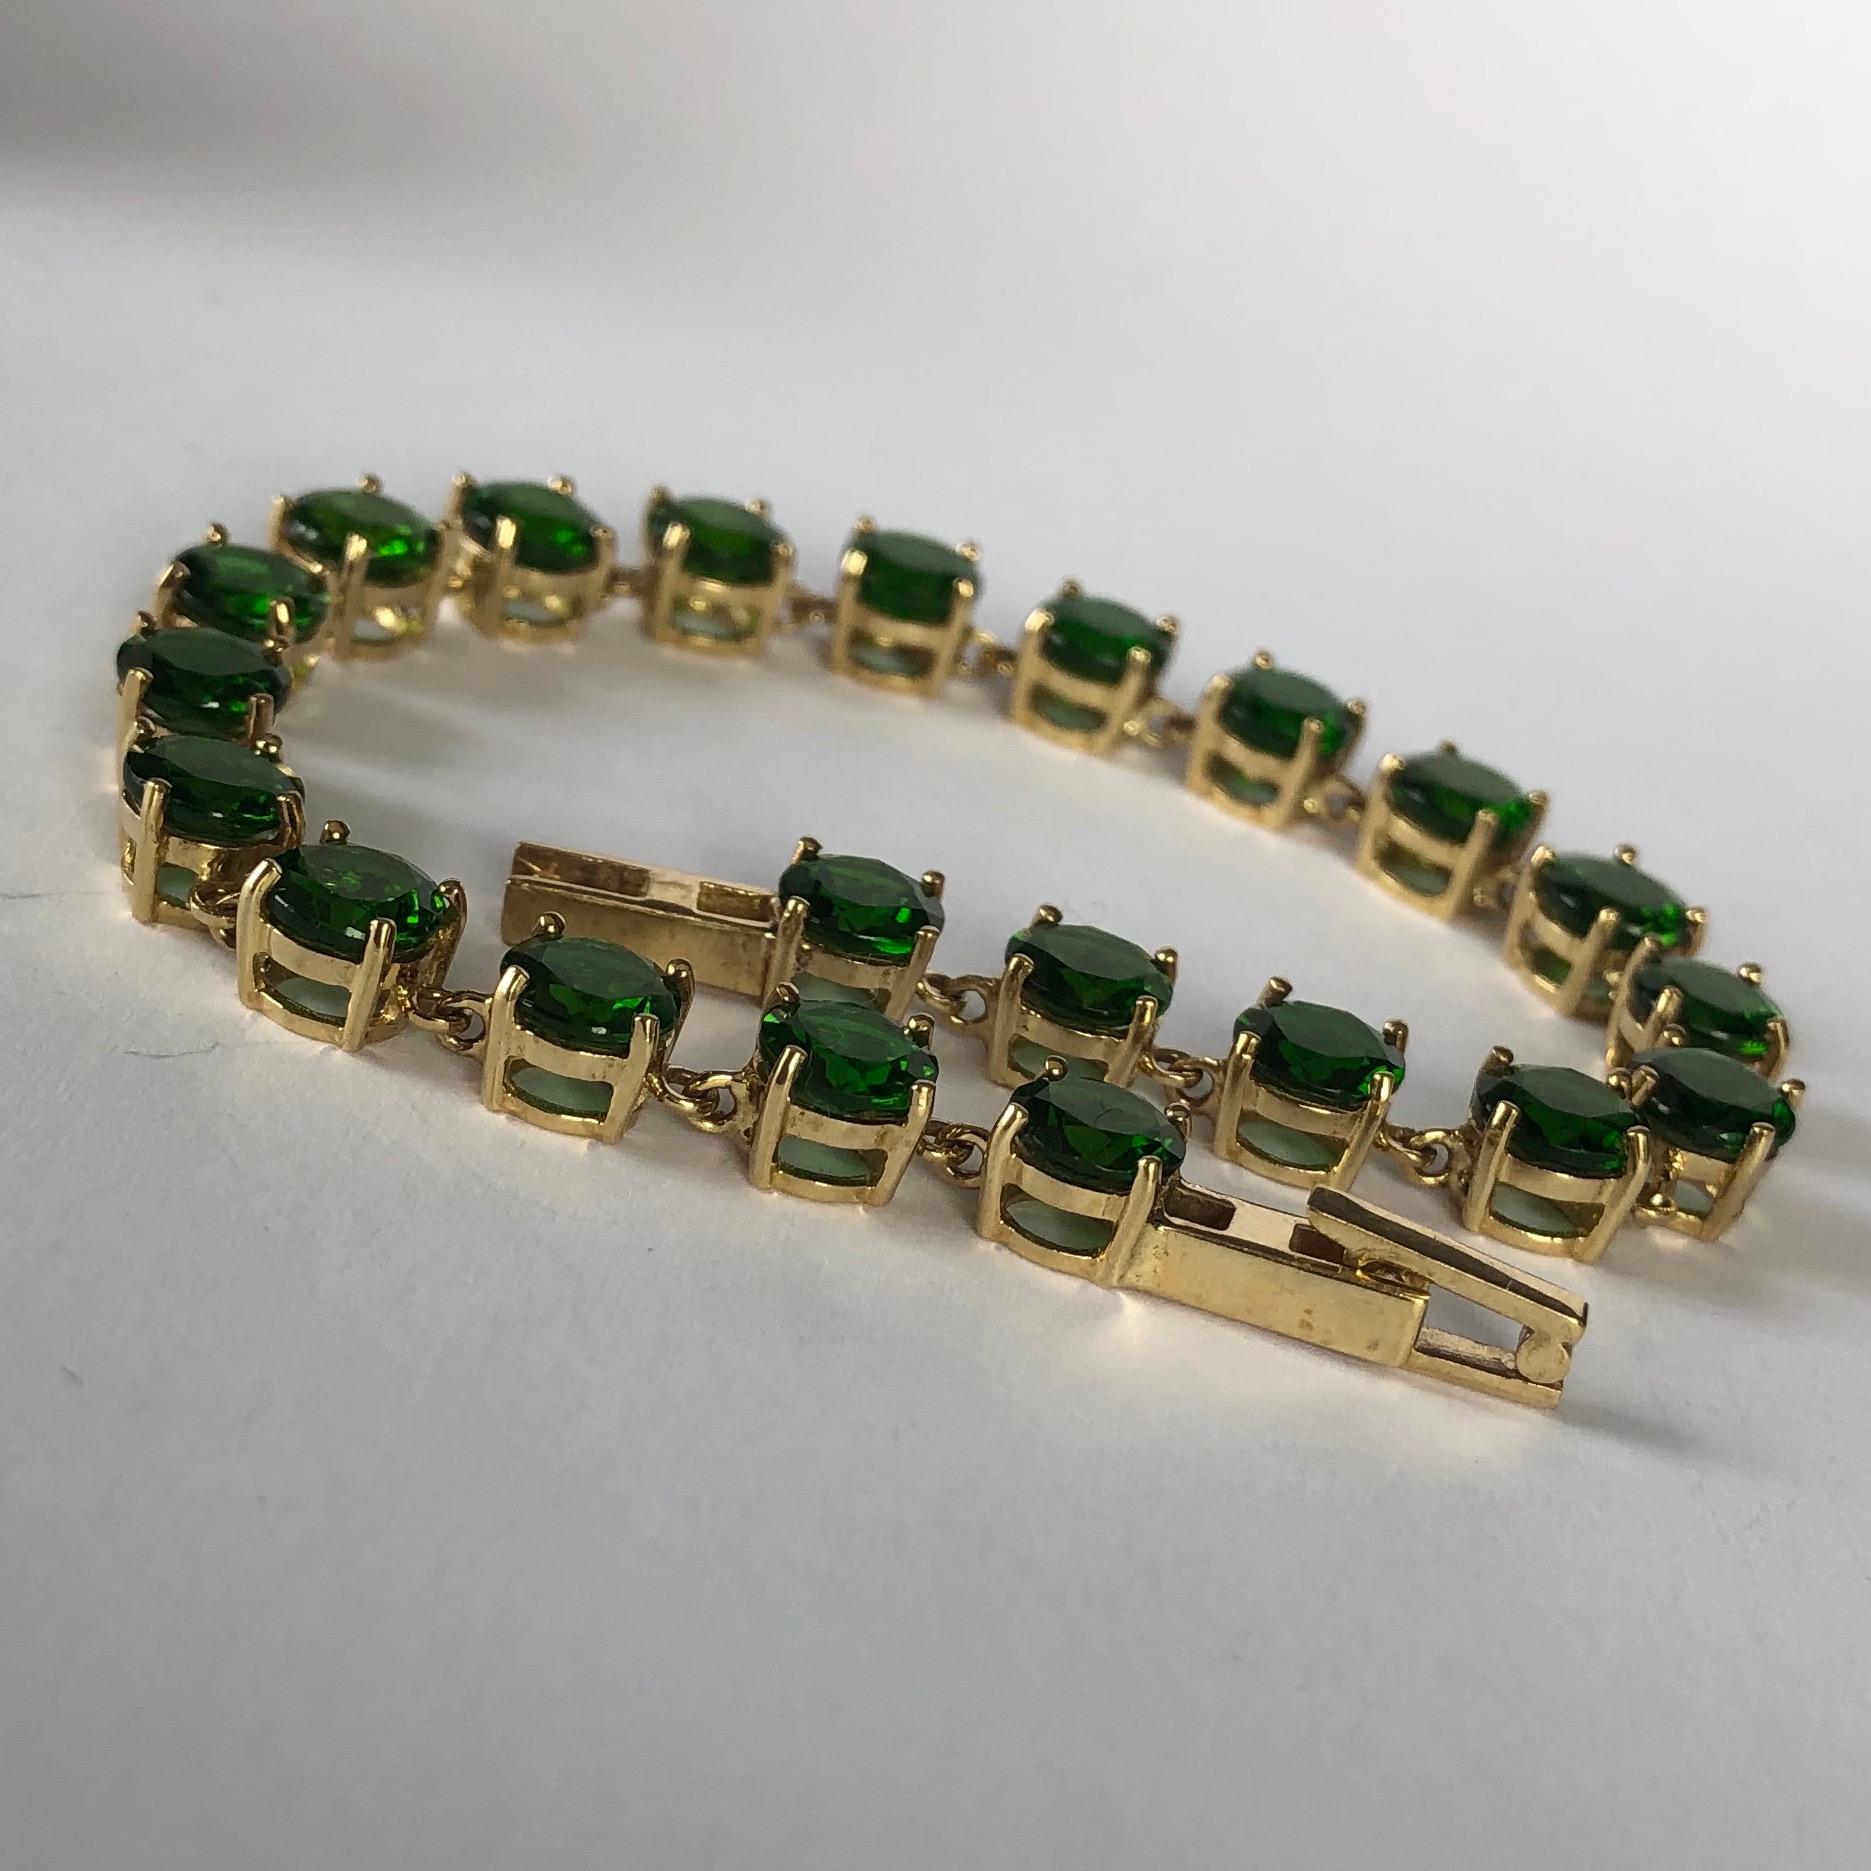 Set in this 9carat gold bracelet are 21 diopside stones which total 21ct. The stones are deep green and when the light hits the stones they have a bright green glow. 

Length: 19.7cm
Width: 6mm

Weight: 12.7g
